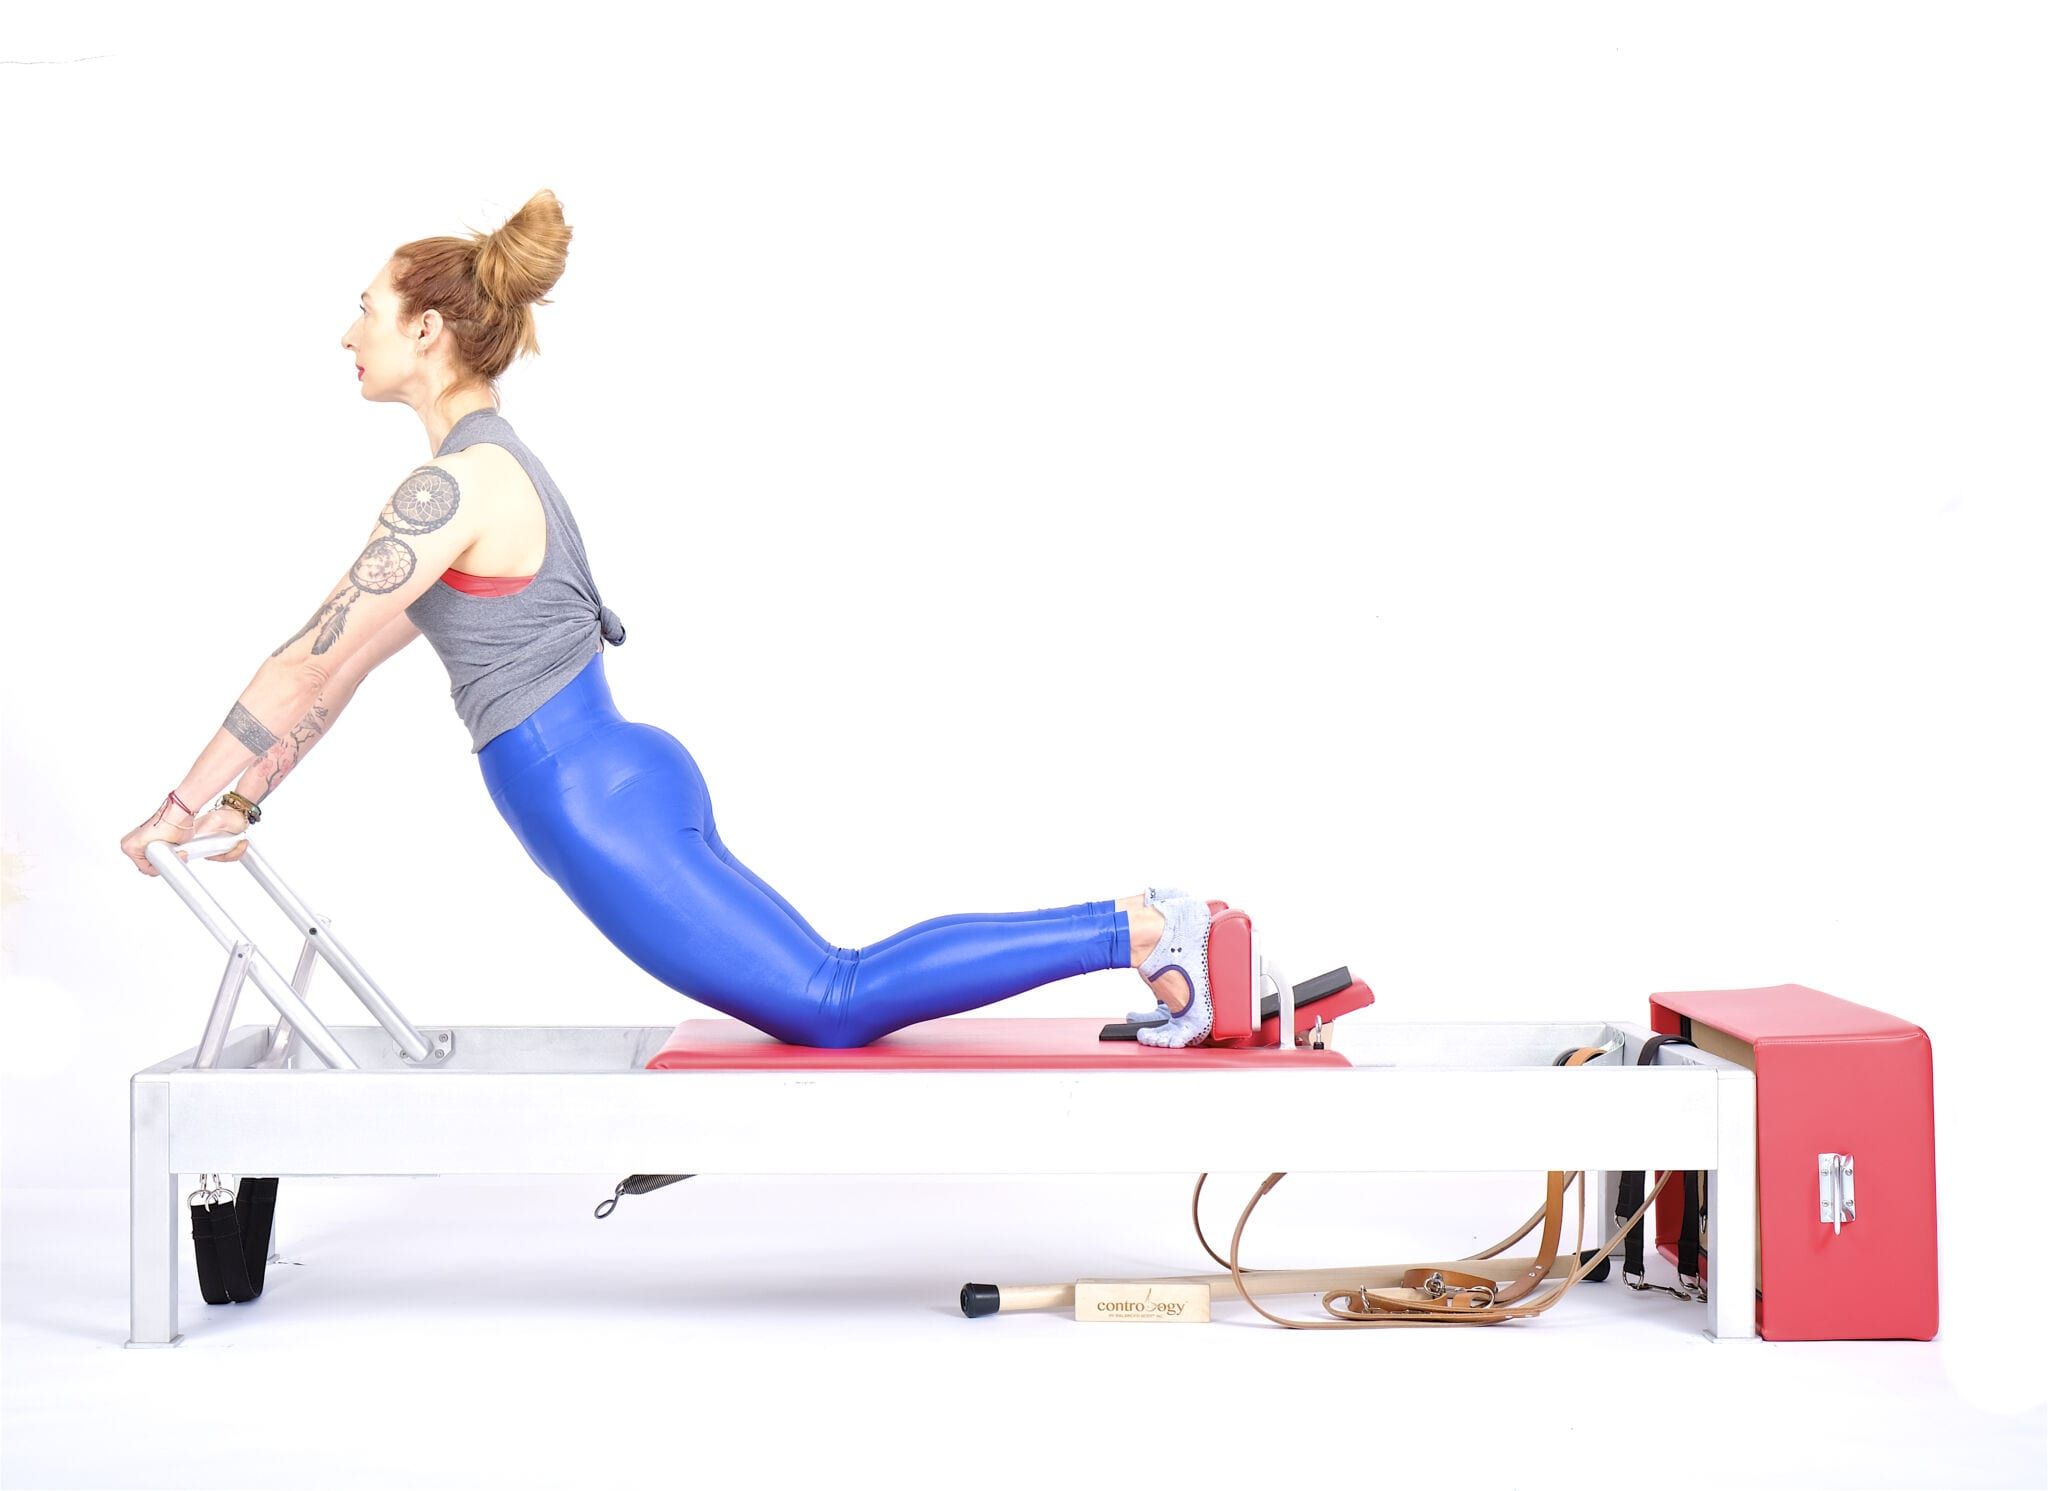 What are some good Pilates Reformer exercises for building lower body